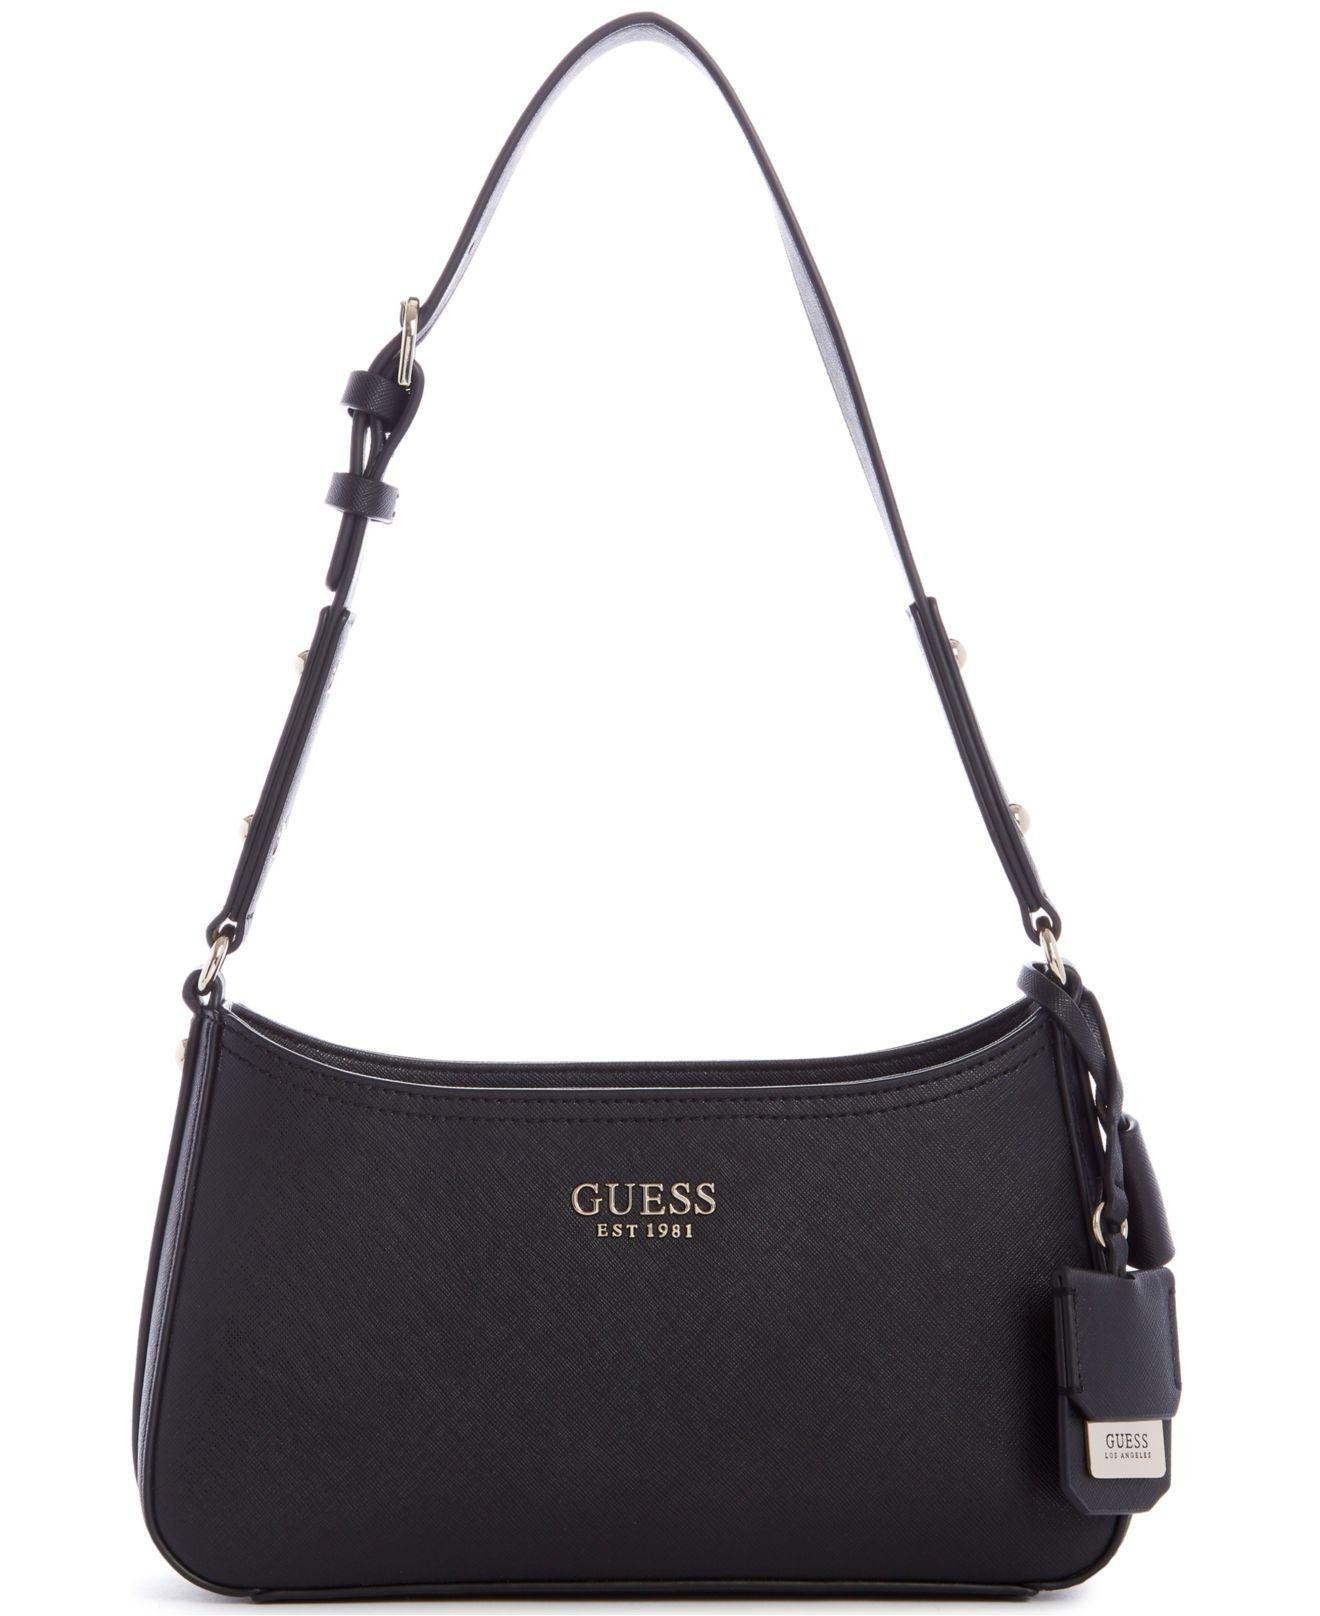 Guess, Bags, Guess Black Purse